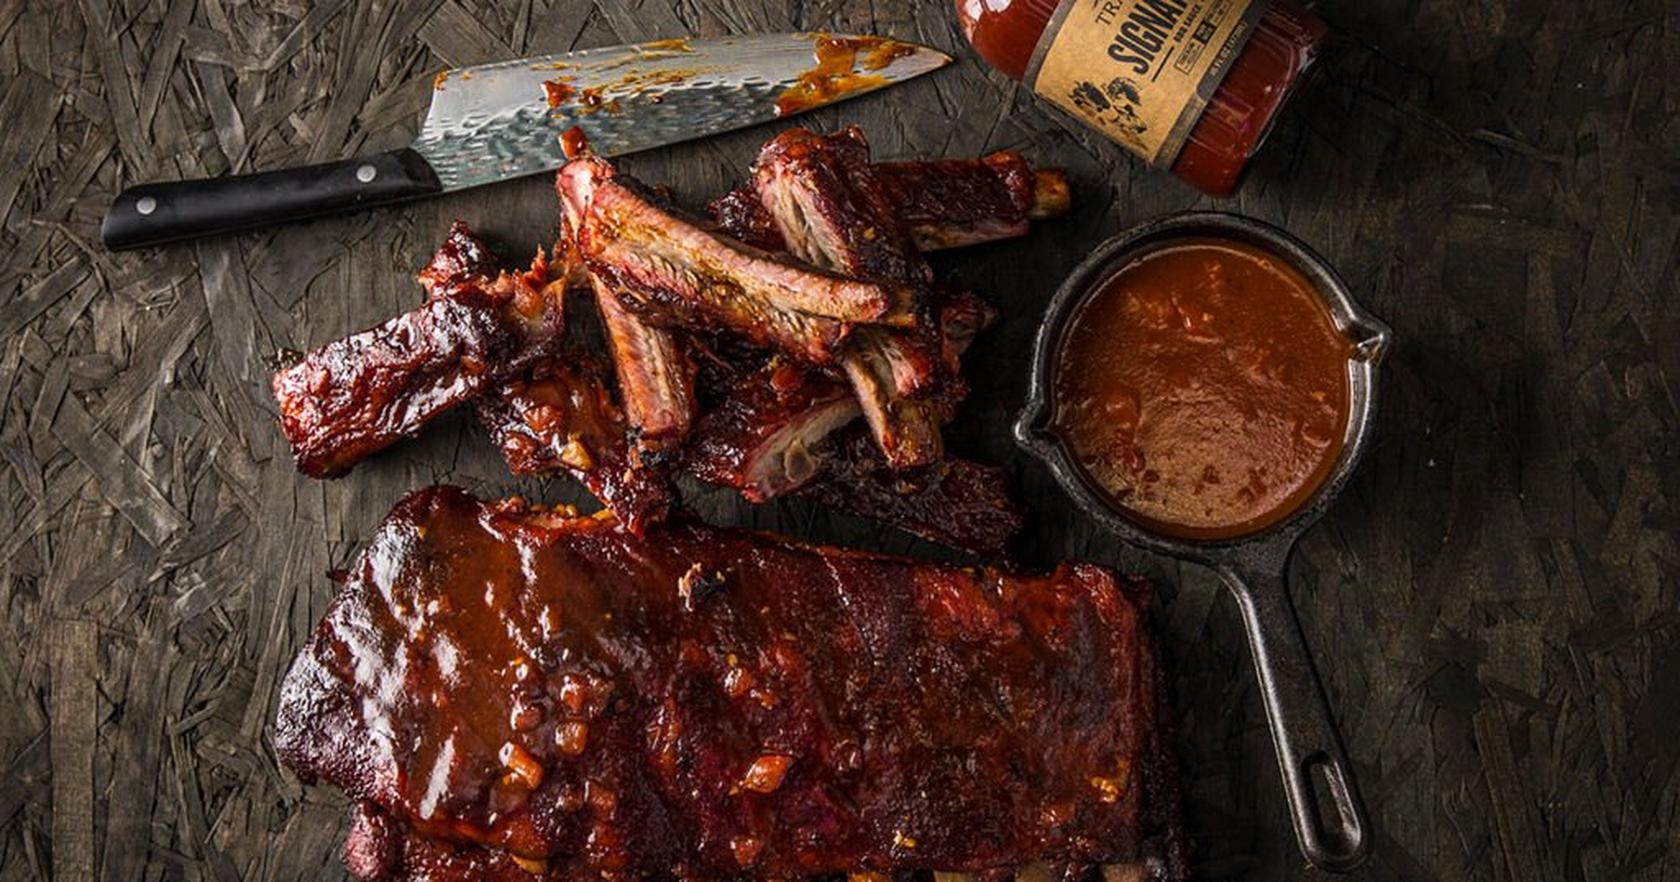 Smoked Ribs With Coconut Rum BBQ Sauce by Journey South